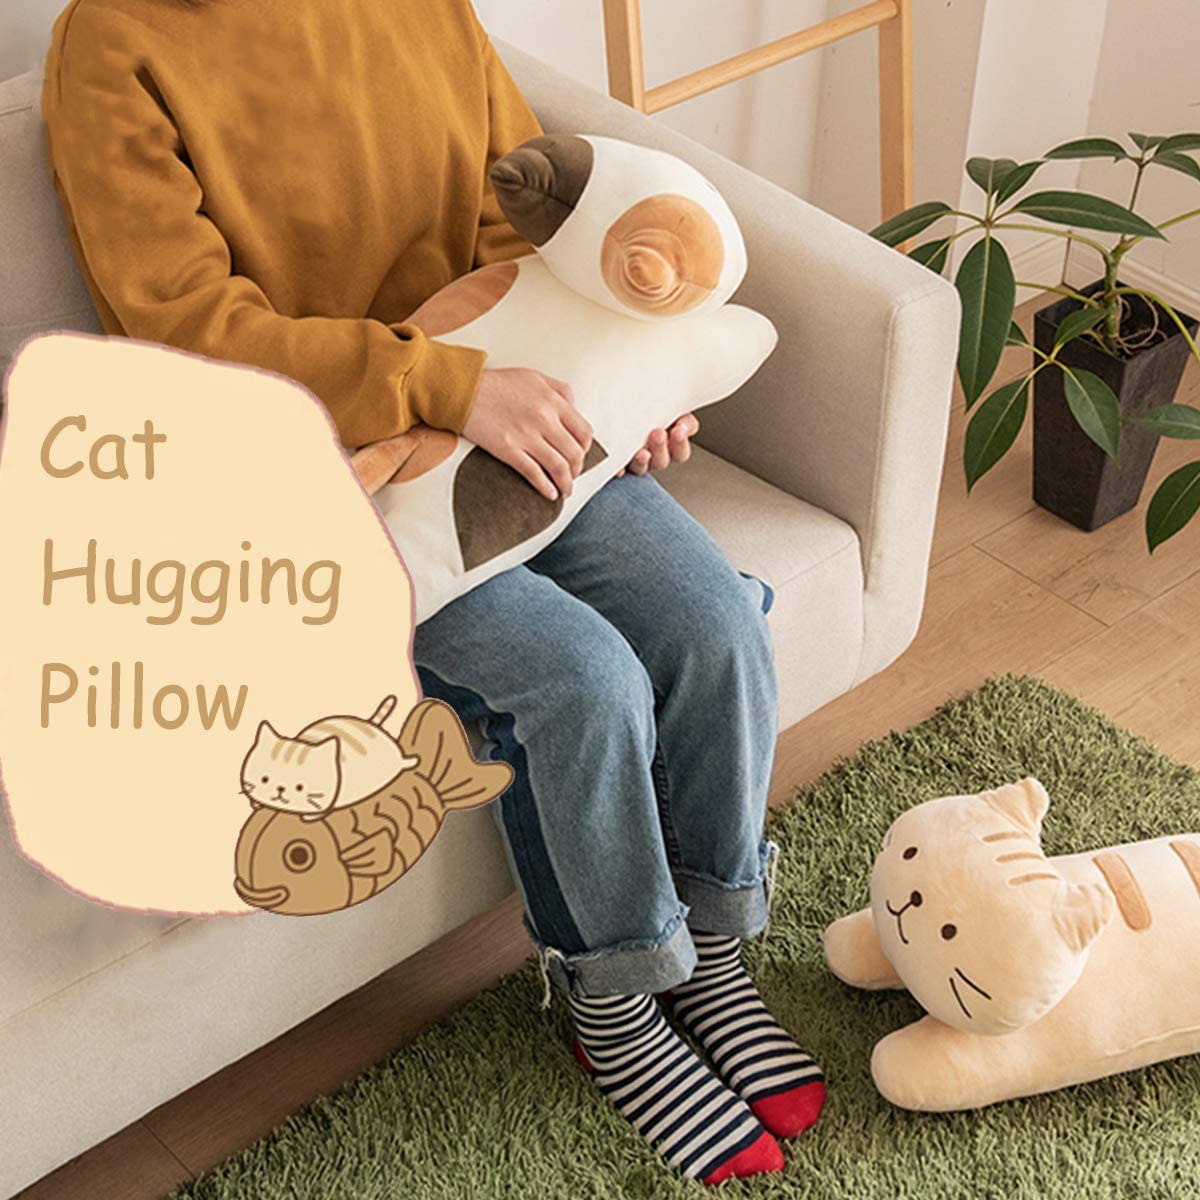 ARELUX 23 inch Soft Cat Big Sleeping Hugging Pillows